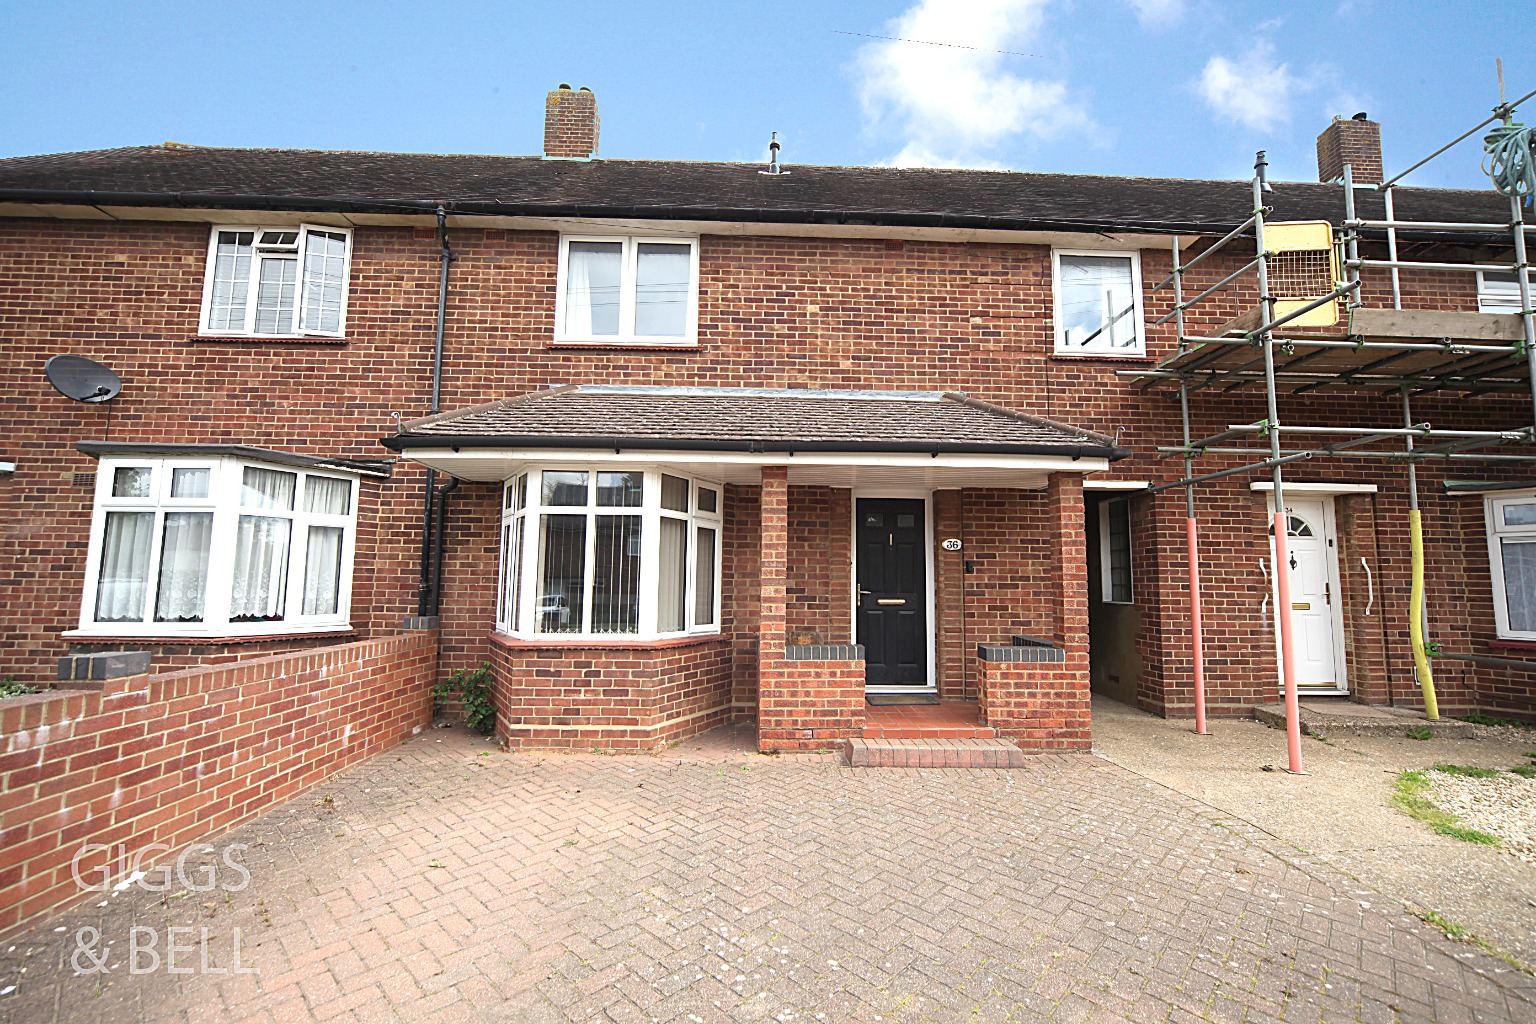 3 bed terraced house for sale in Whipperley Way, Luton - Property Image 1